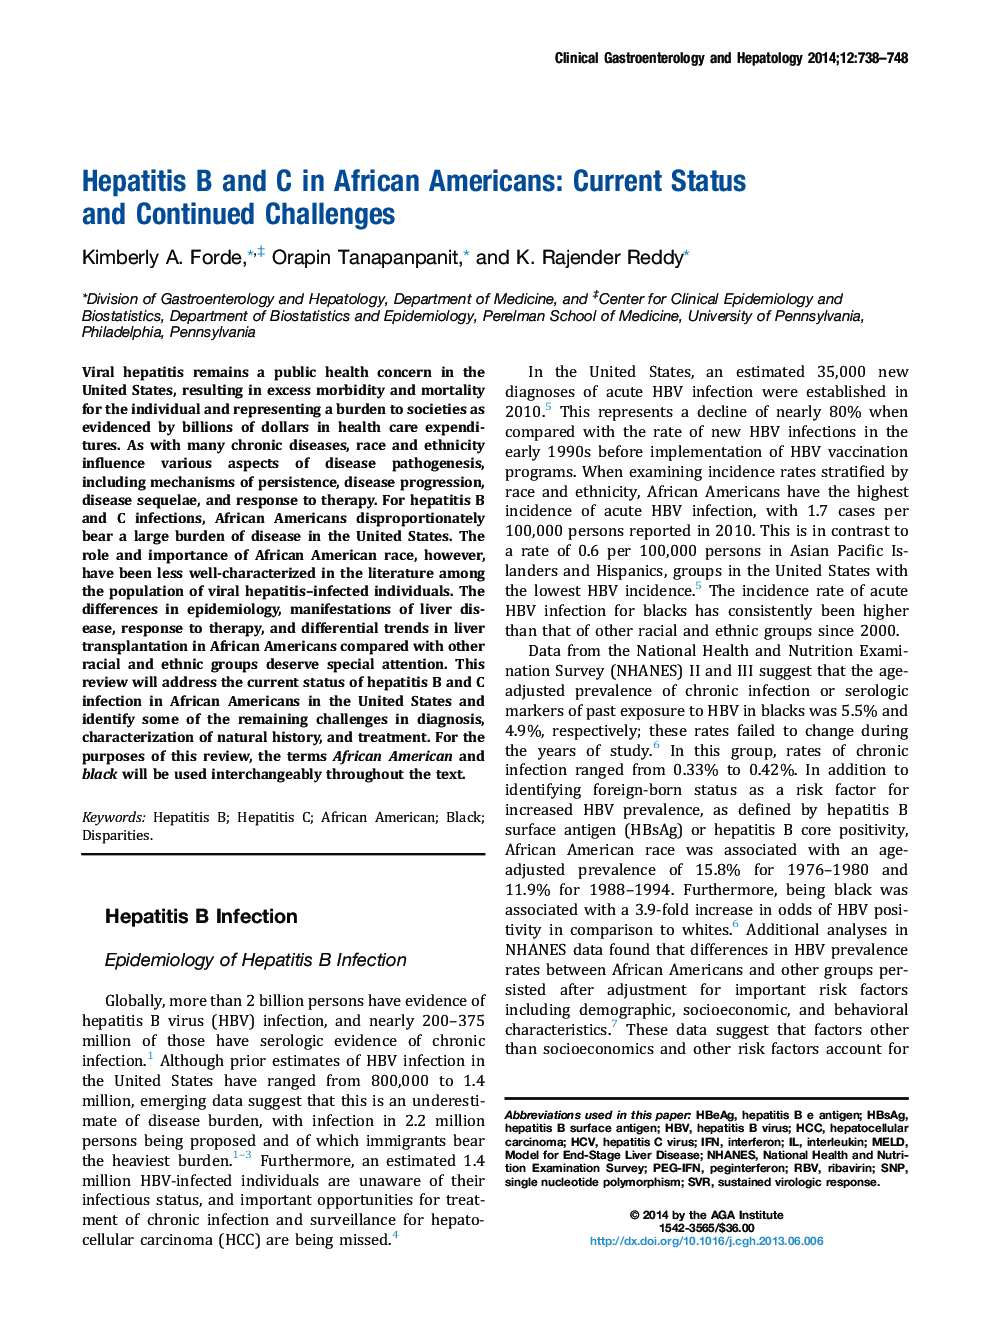 Hepatitis B and C in African Americans: Current Status andÂ ContinuedÂ Challenges